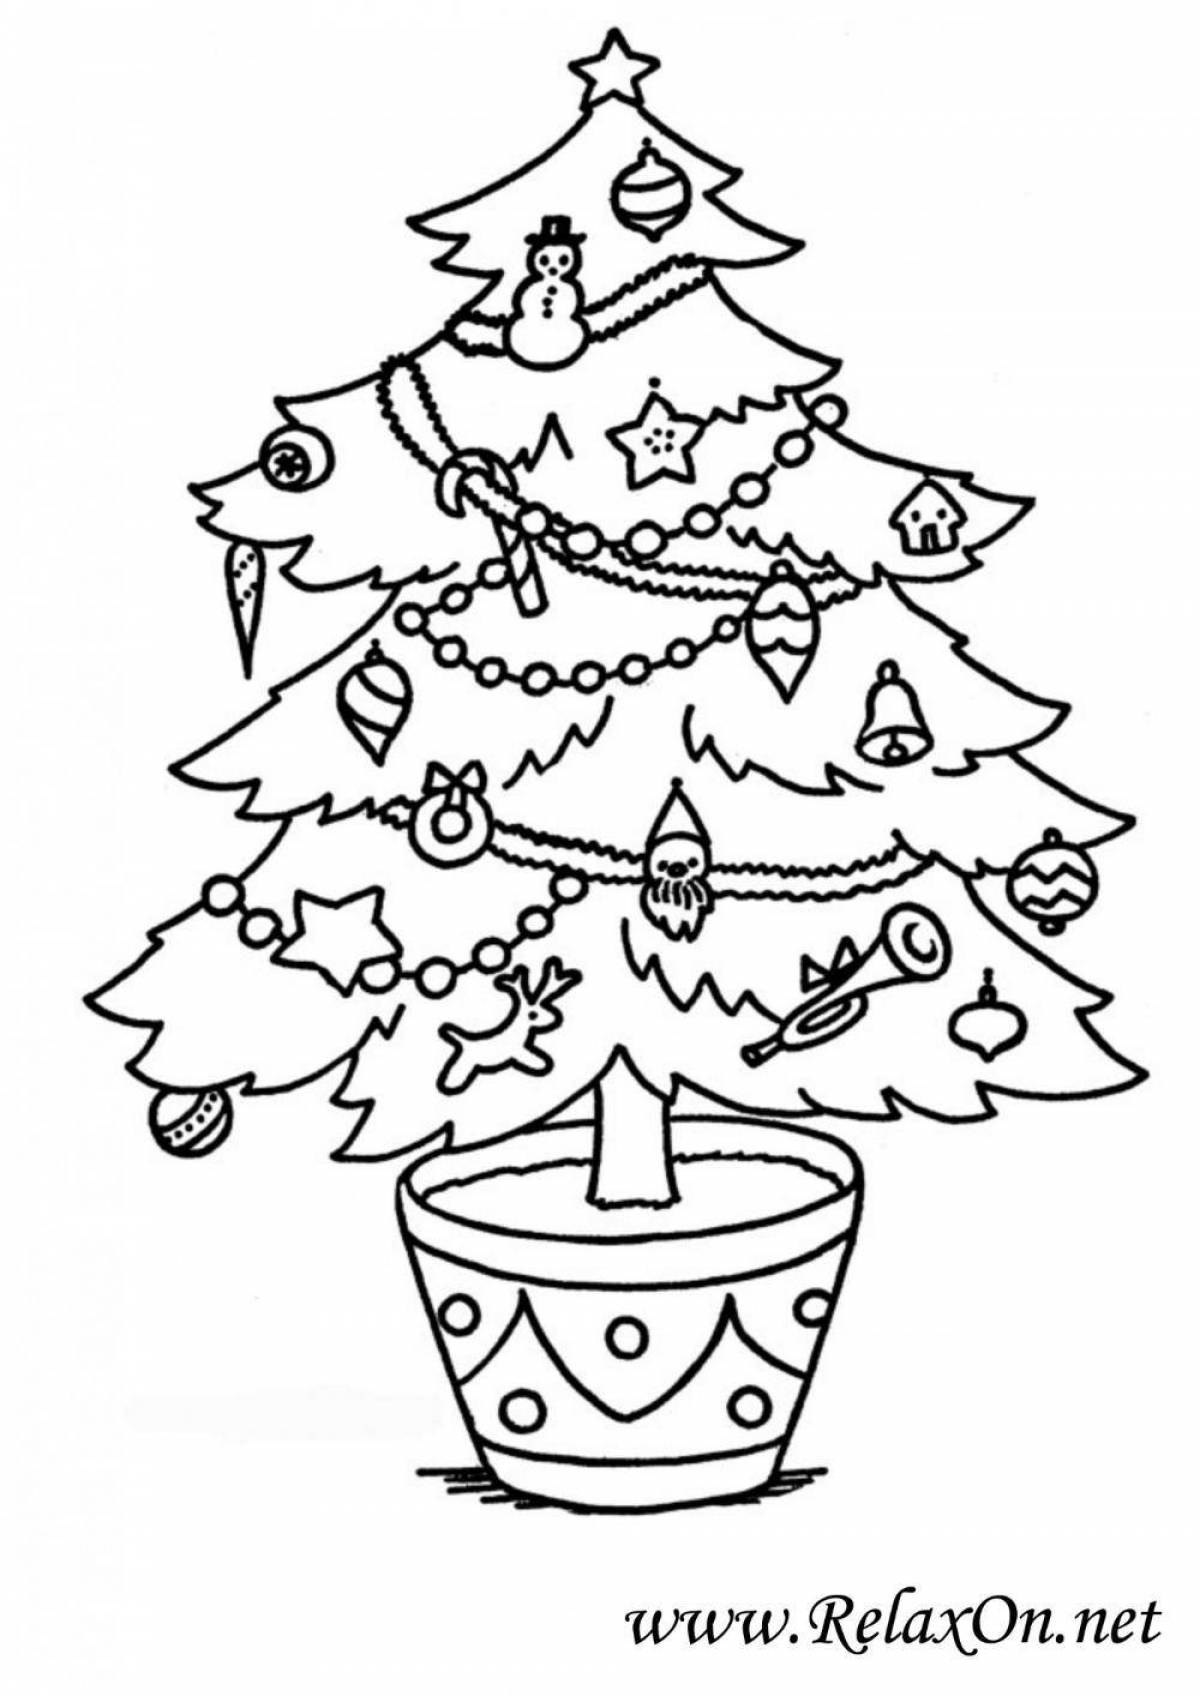 Live little Christmas coloring book